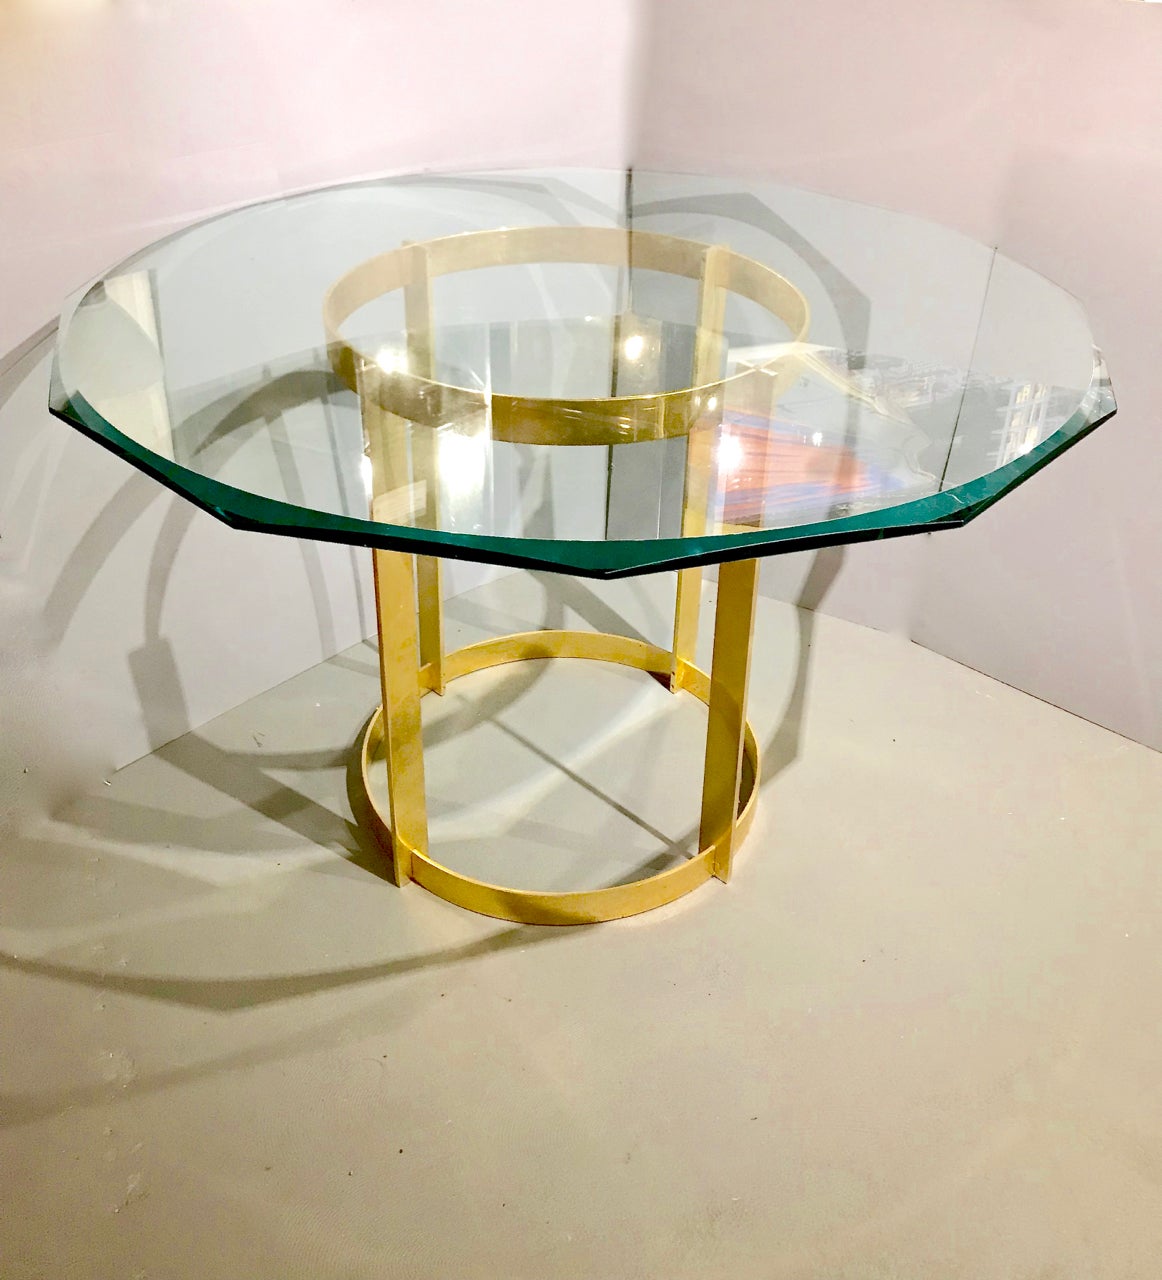 This is a stunning gilt bronze and glass center or dining table attributed to/style of Fontana Arte that dates to circa 1980s. The minimal linear design of the gilt bronze base allows the table to integrate perfectly into a period design concept, as